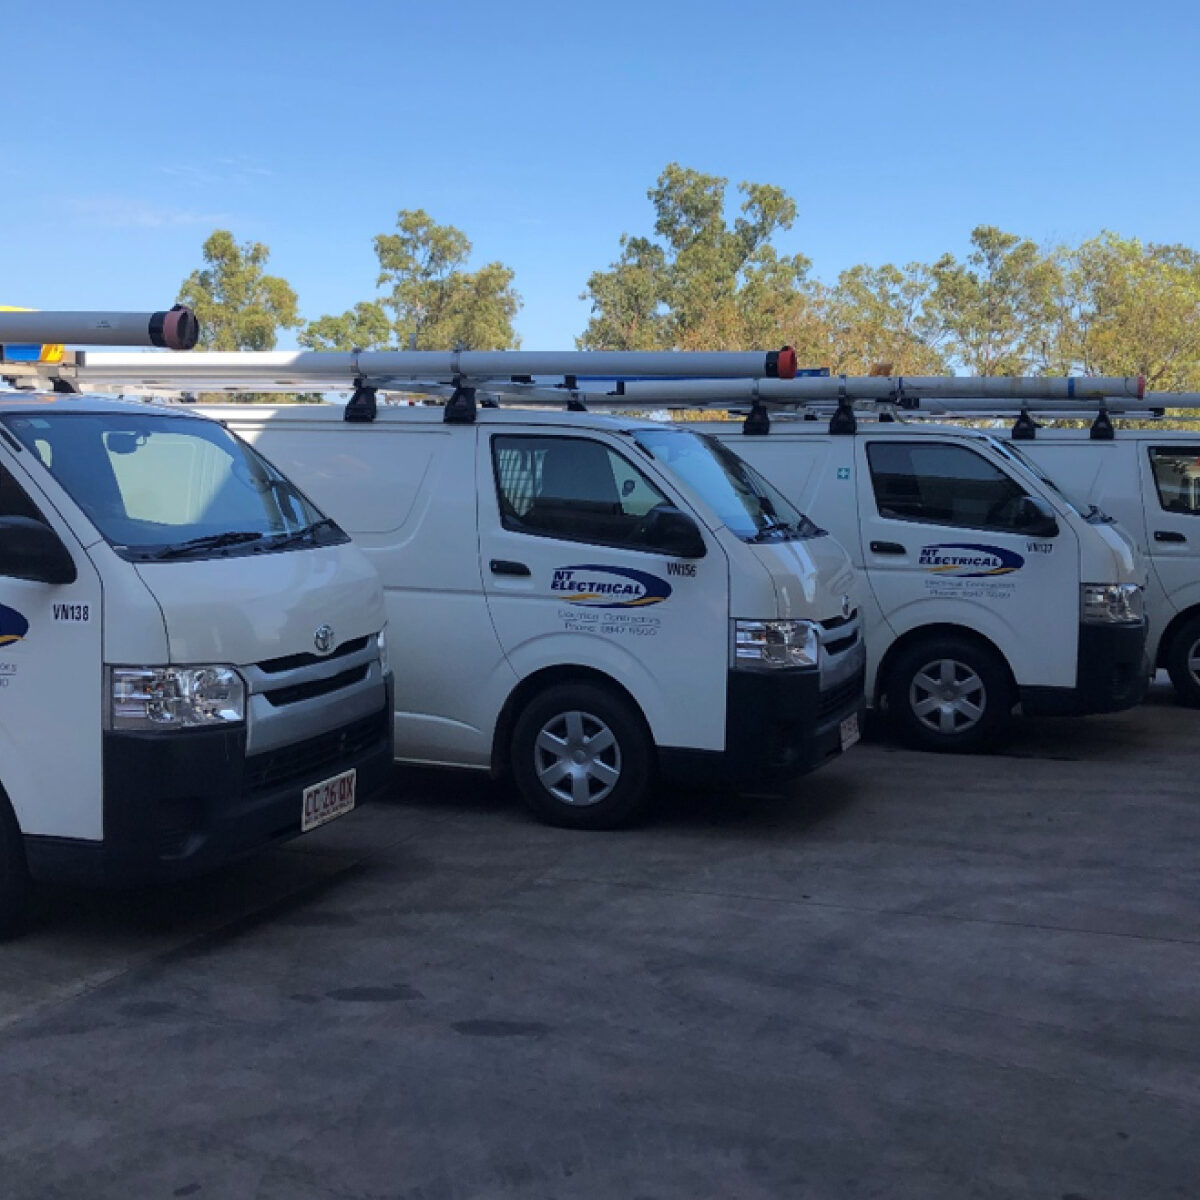 Northern Territory Electrical Group - Electrical Technician vans parked side by side.